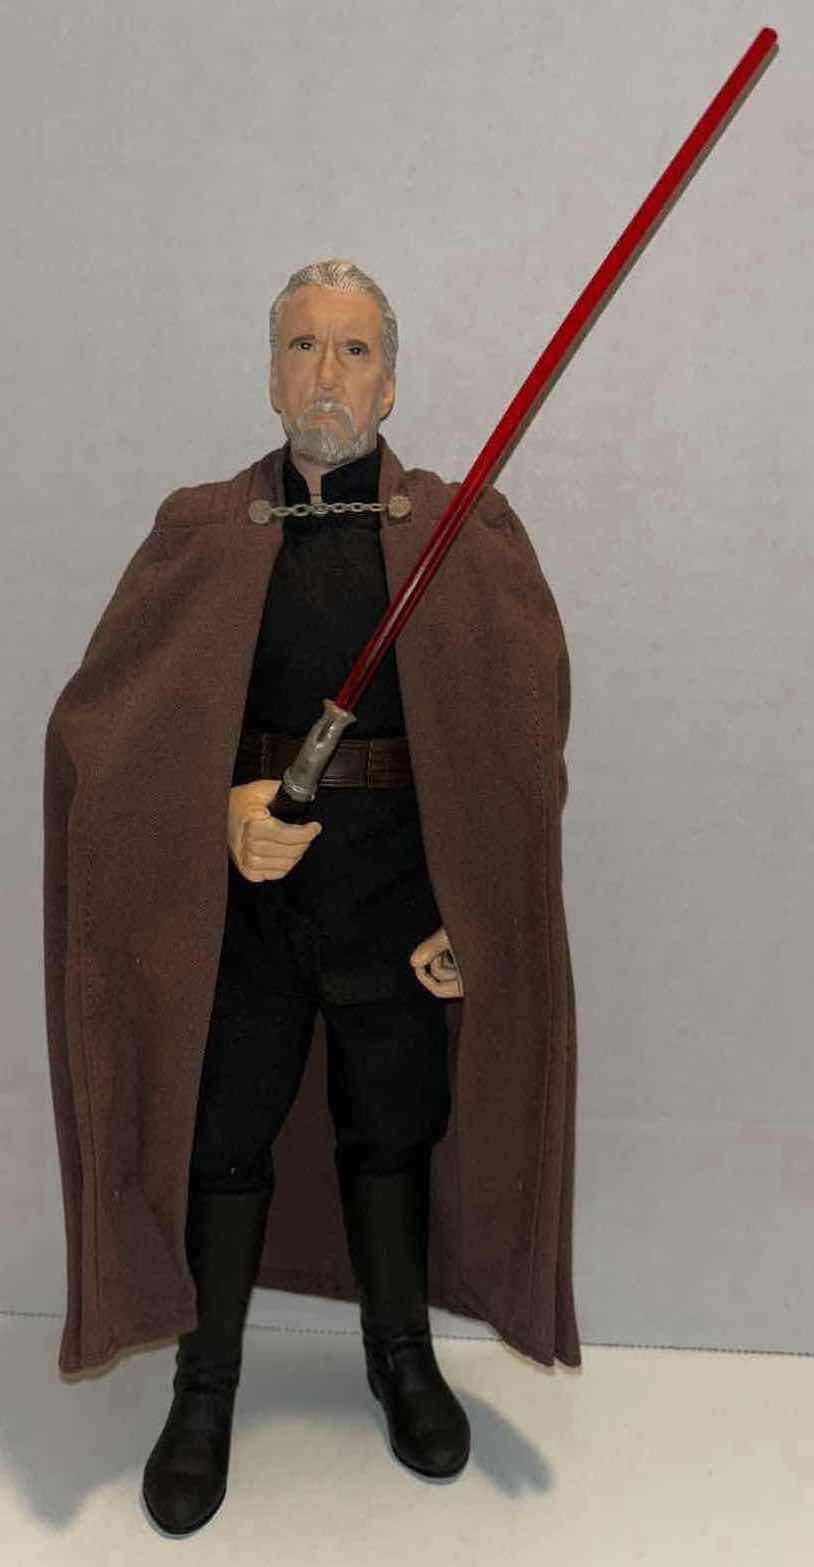 Photo 1 of HASBRO 2002 STAR WARS ATTACK OF THE CLONES 12” COUNT DOOKU FIGURE W LIGHTSABER (FULLY POSEABLE)